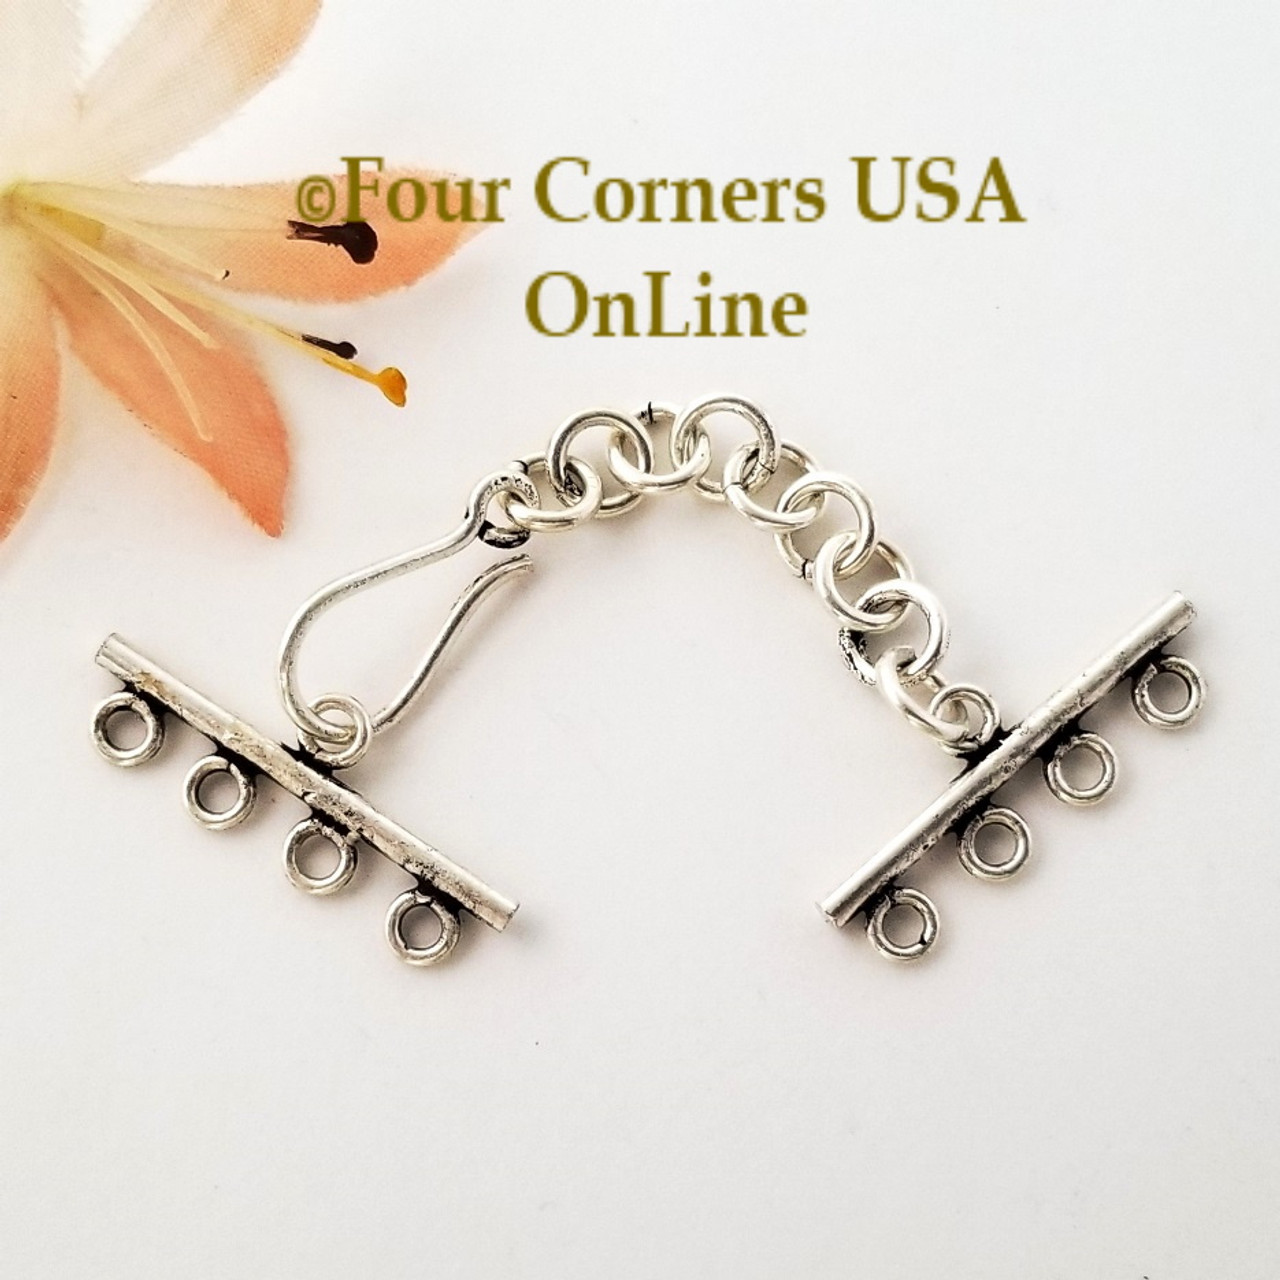 4 Strand Adjustable Hook Eye Clasp Sterling over Copper 4 Clasp Closeout  Final Sale BDZ-2089 - Four Corners USA Online